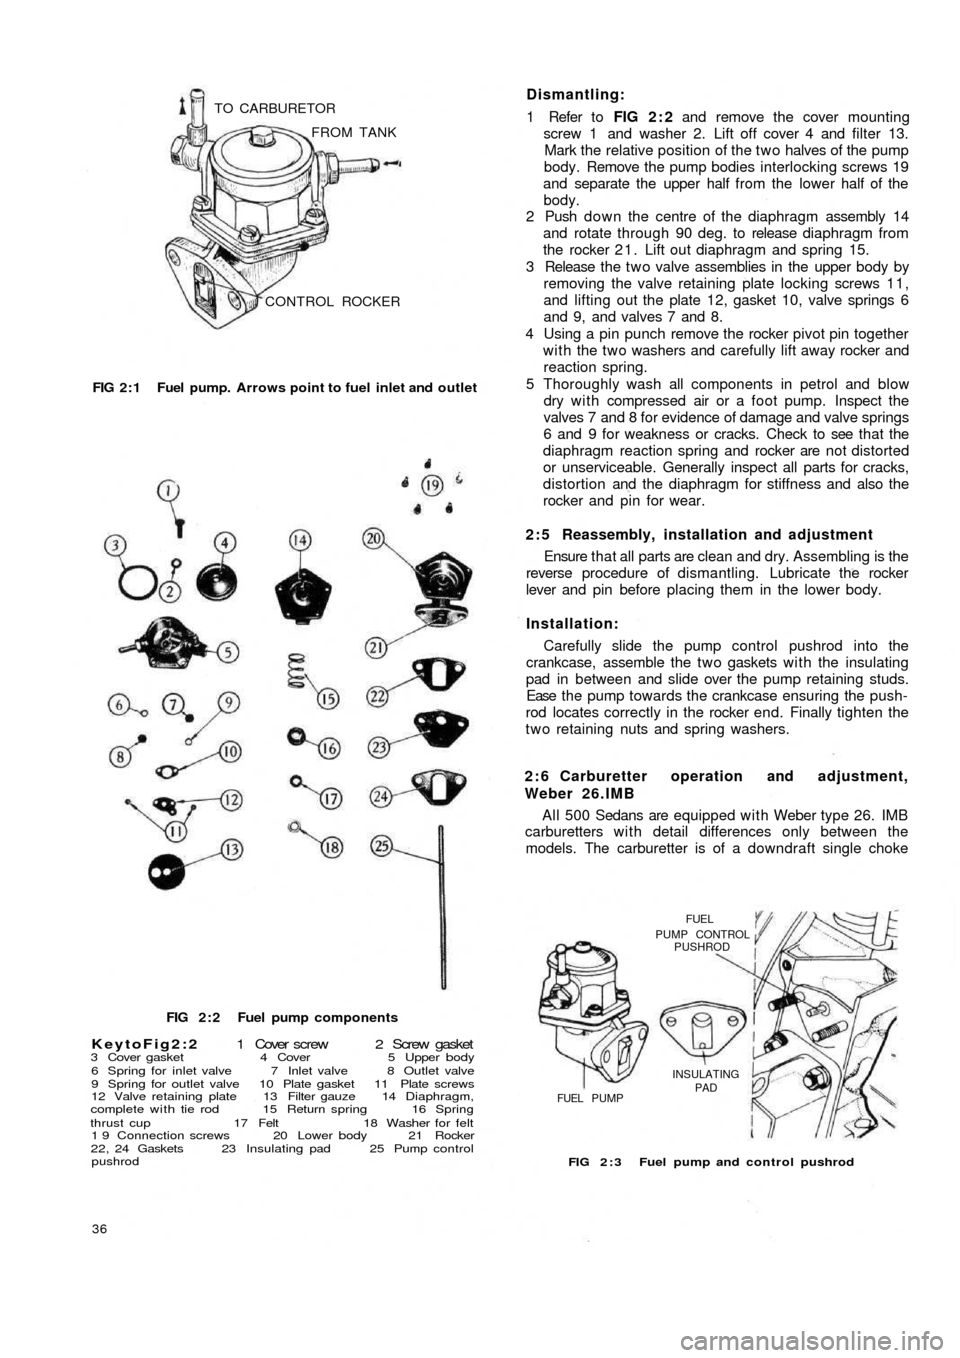 FIAT 500 1964 1.G Workshop Manual CONTROL ROCKER FROM TANK TO CARBURETOR
FIG 2 : 1  Fuel pump. Arrows point to fuel  inlet and outlet
FIG 2 : 2  Fuel pump components
KeytoFig2:2 1  Cover  screw  2  Screw  gasket3 Cover gasket 4 Cover 